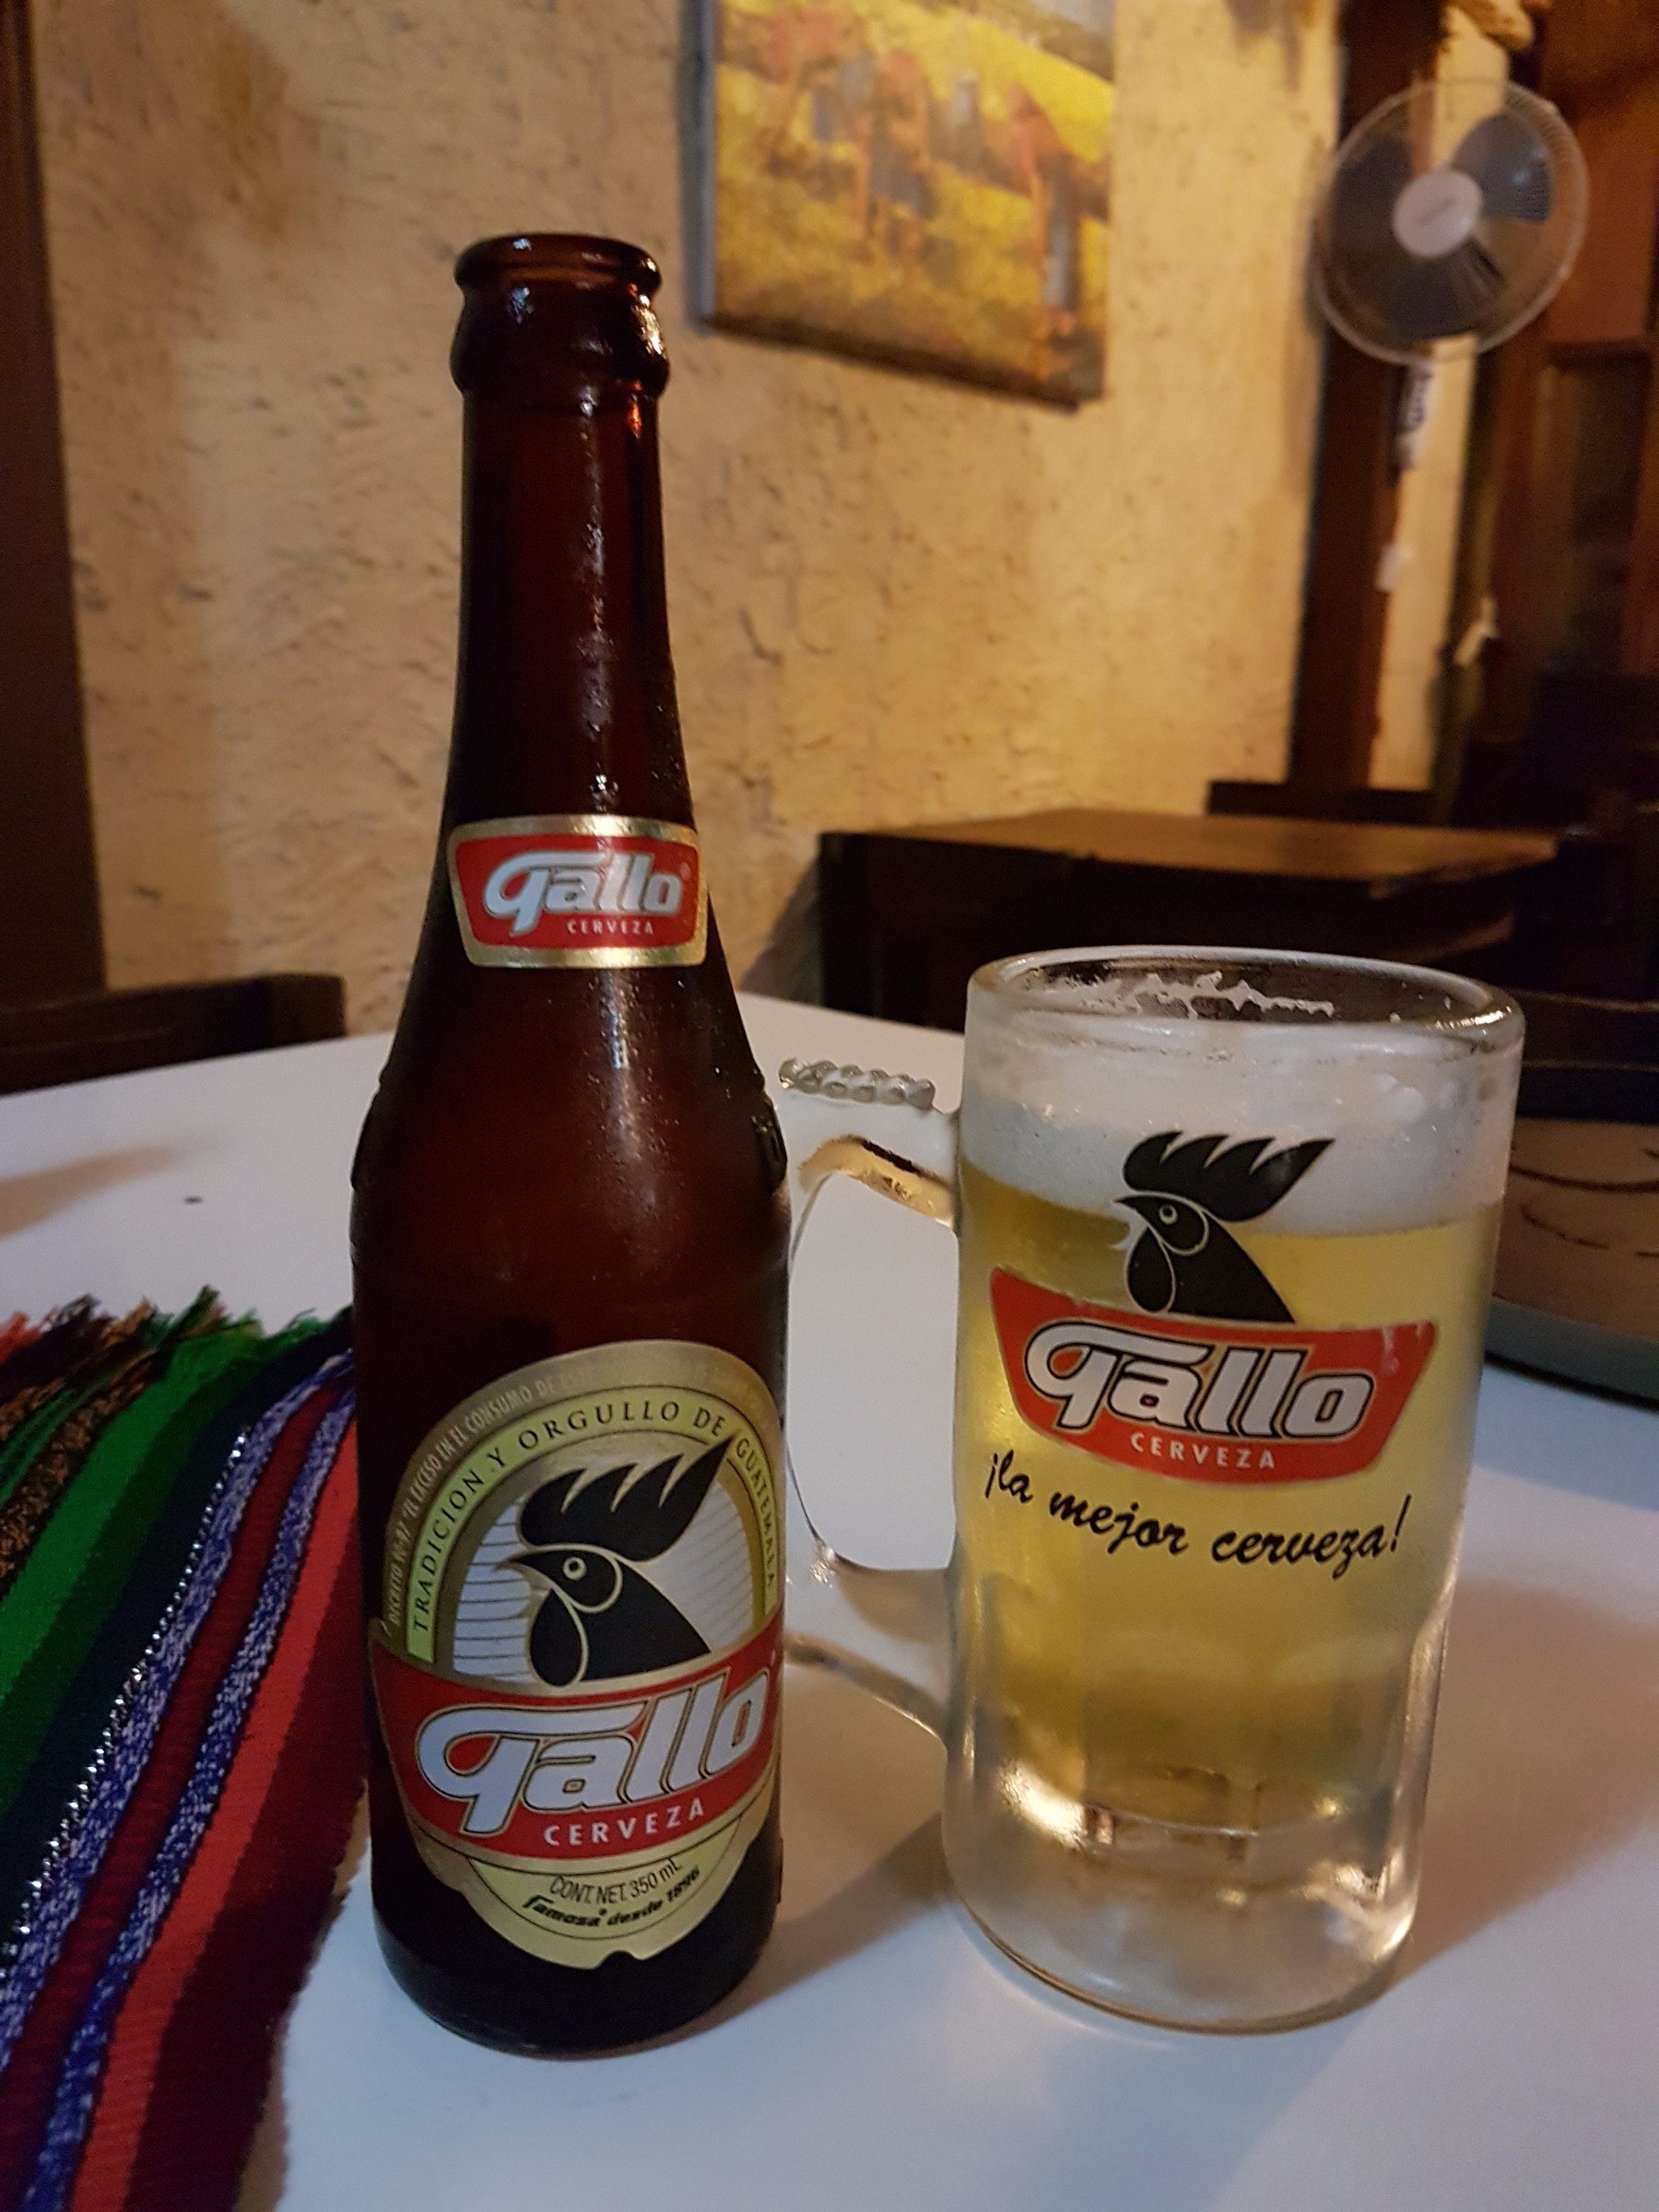 Gallo the local beer | Photo